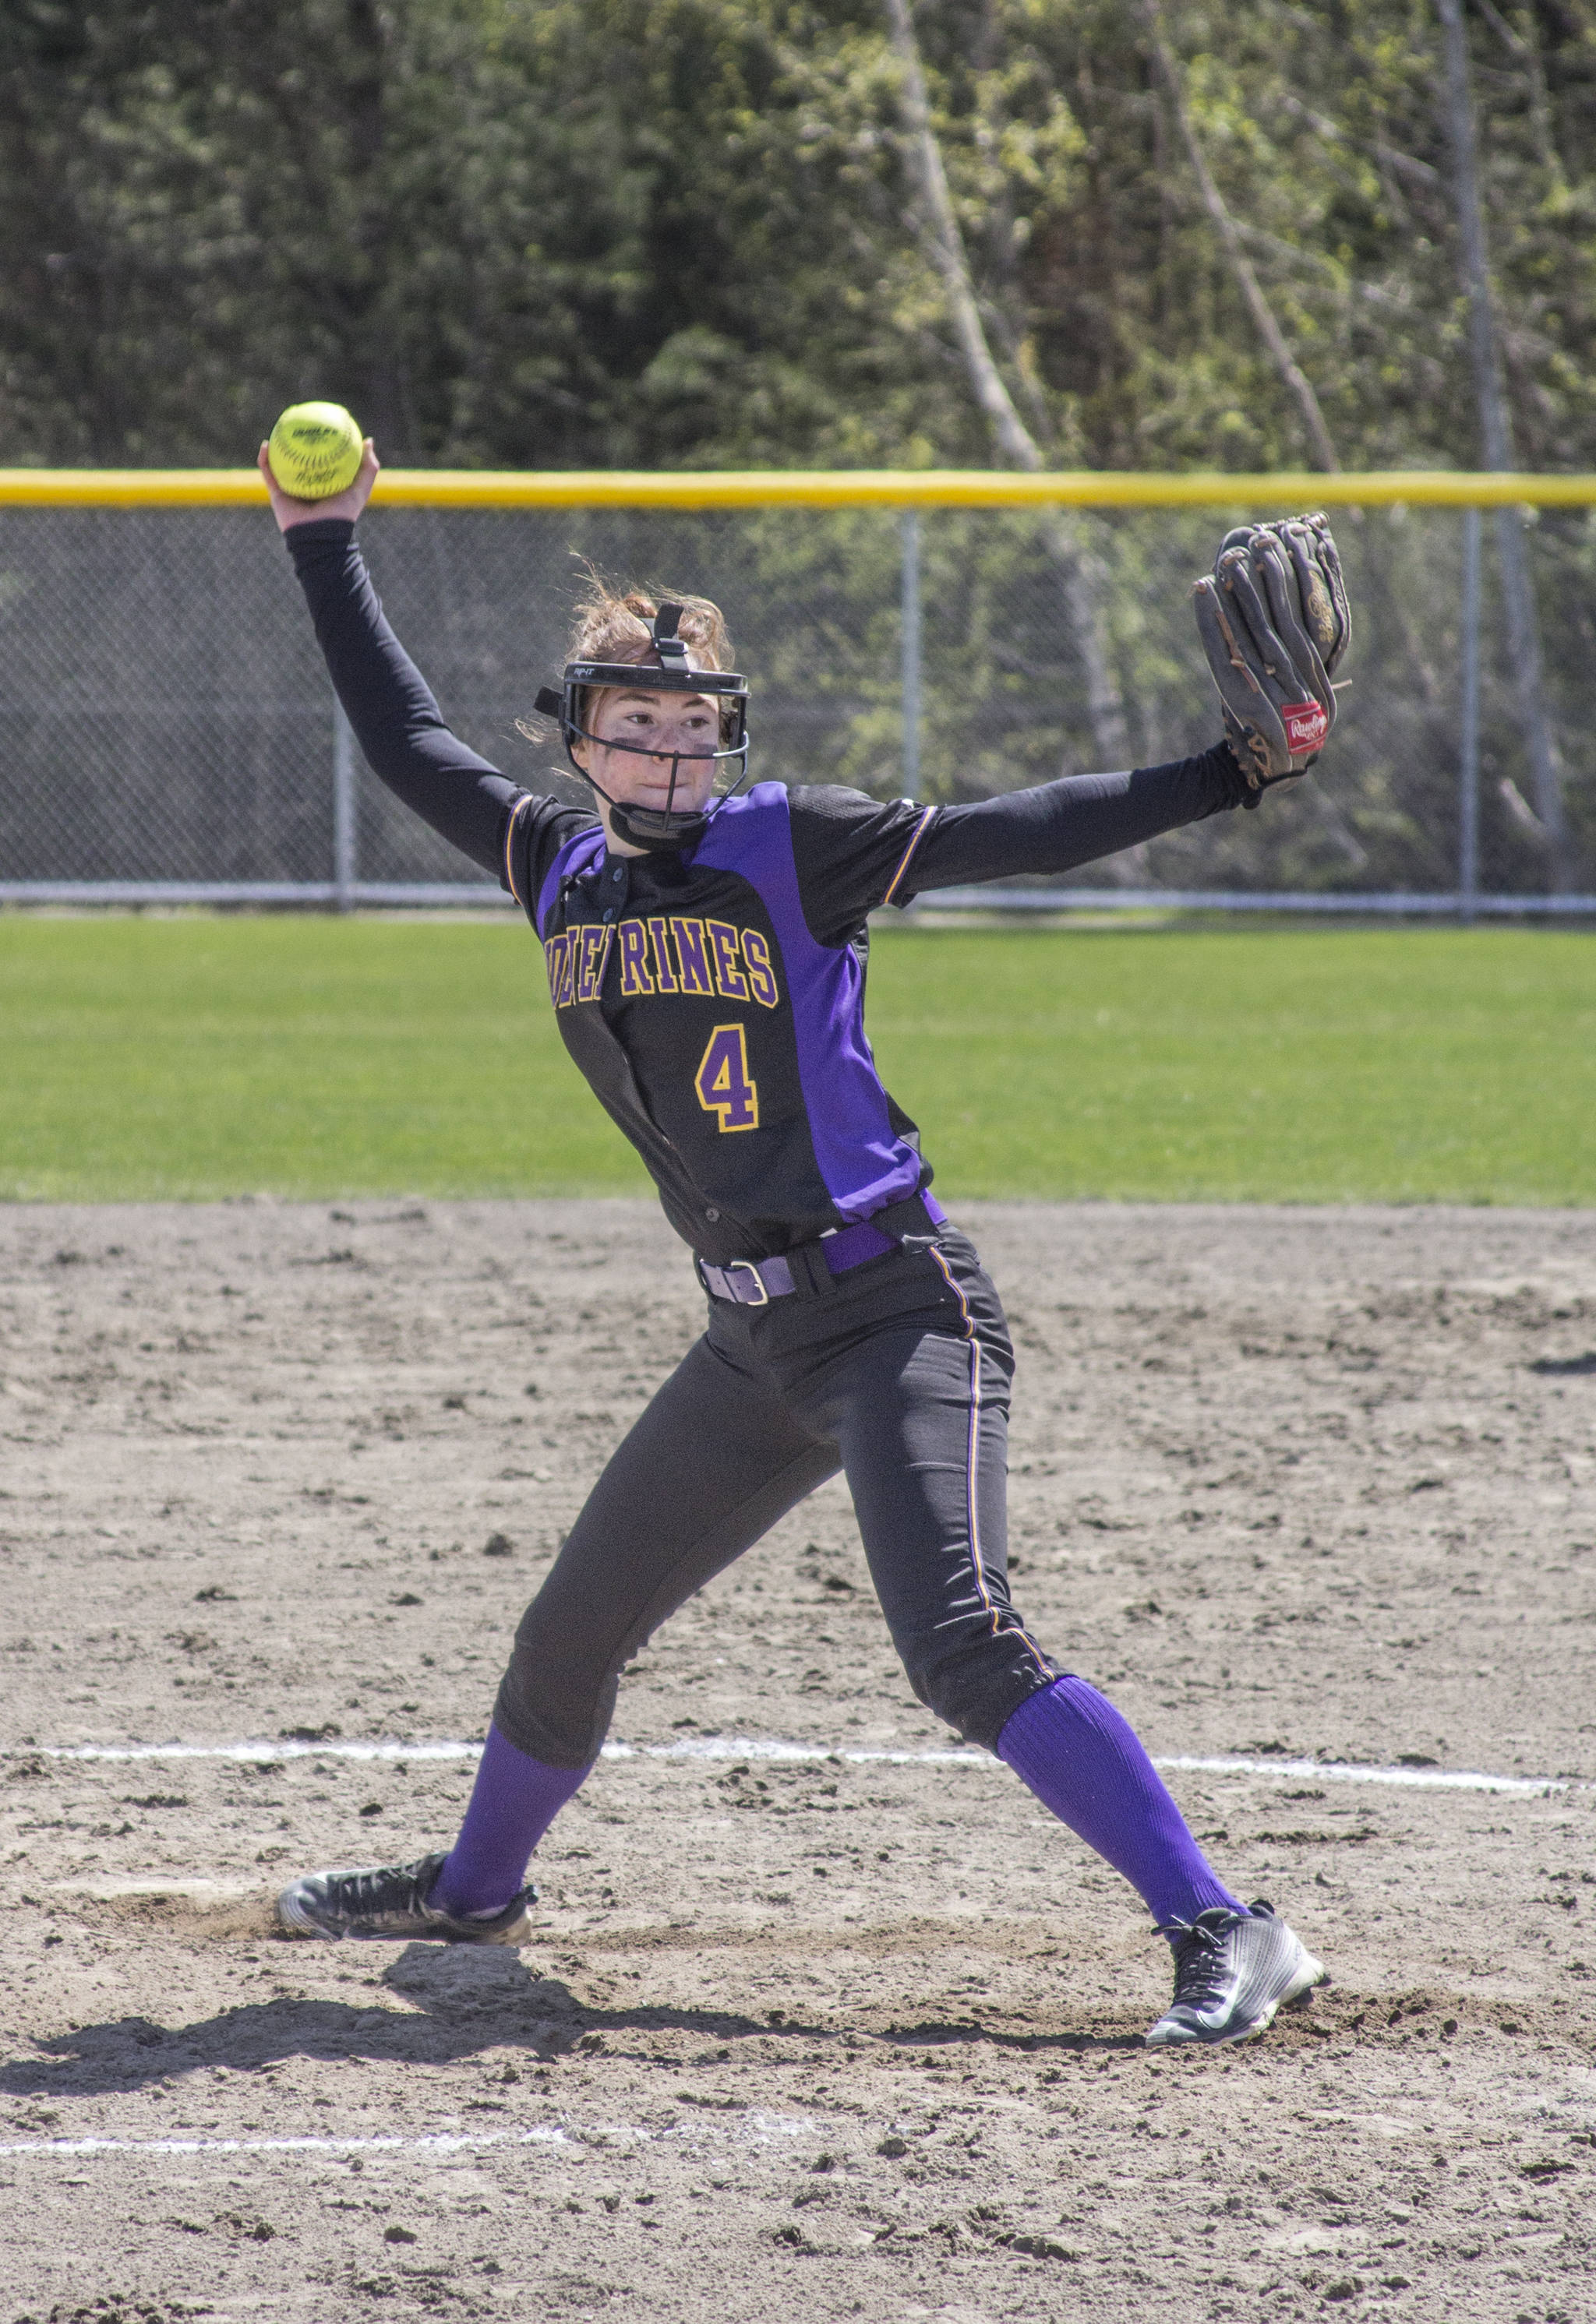 Wolverine girls fastpitch, 2-0 in league play